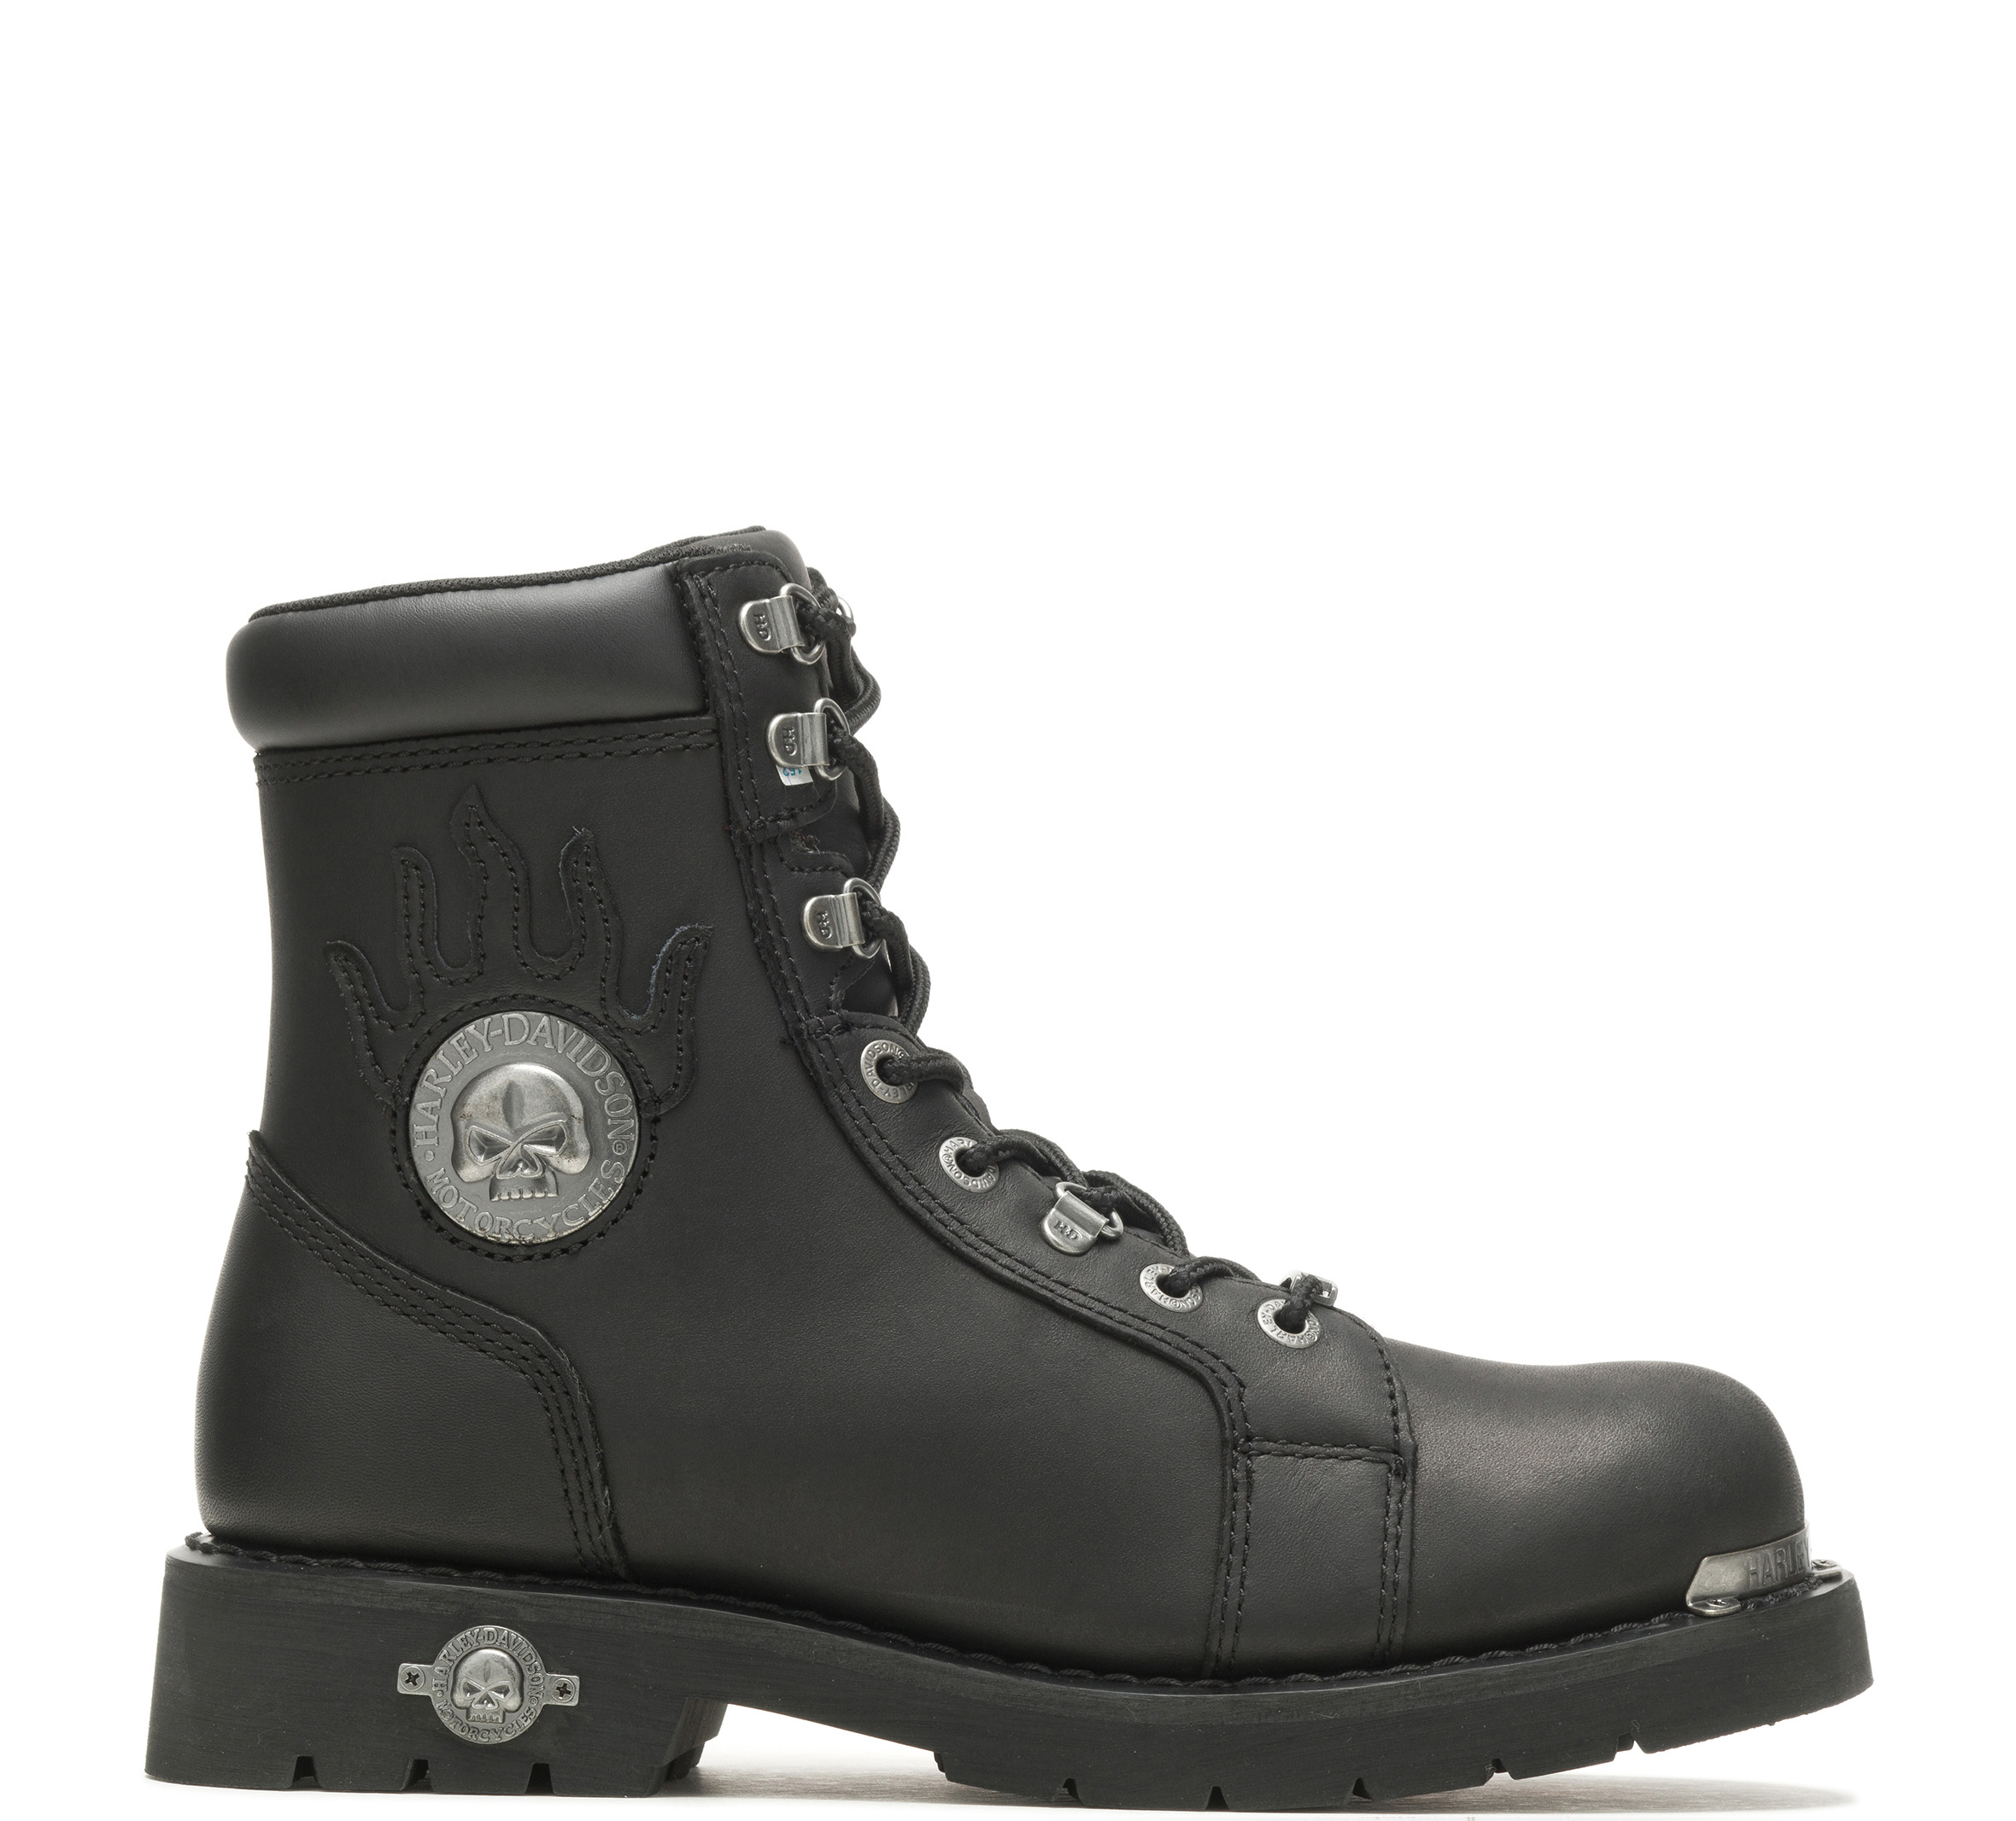 Men's Motorcycle Boots & Shoes | Harley-Davidson Europe